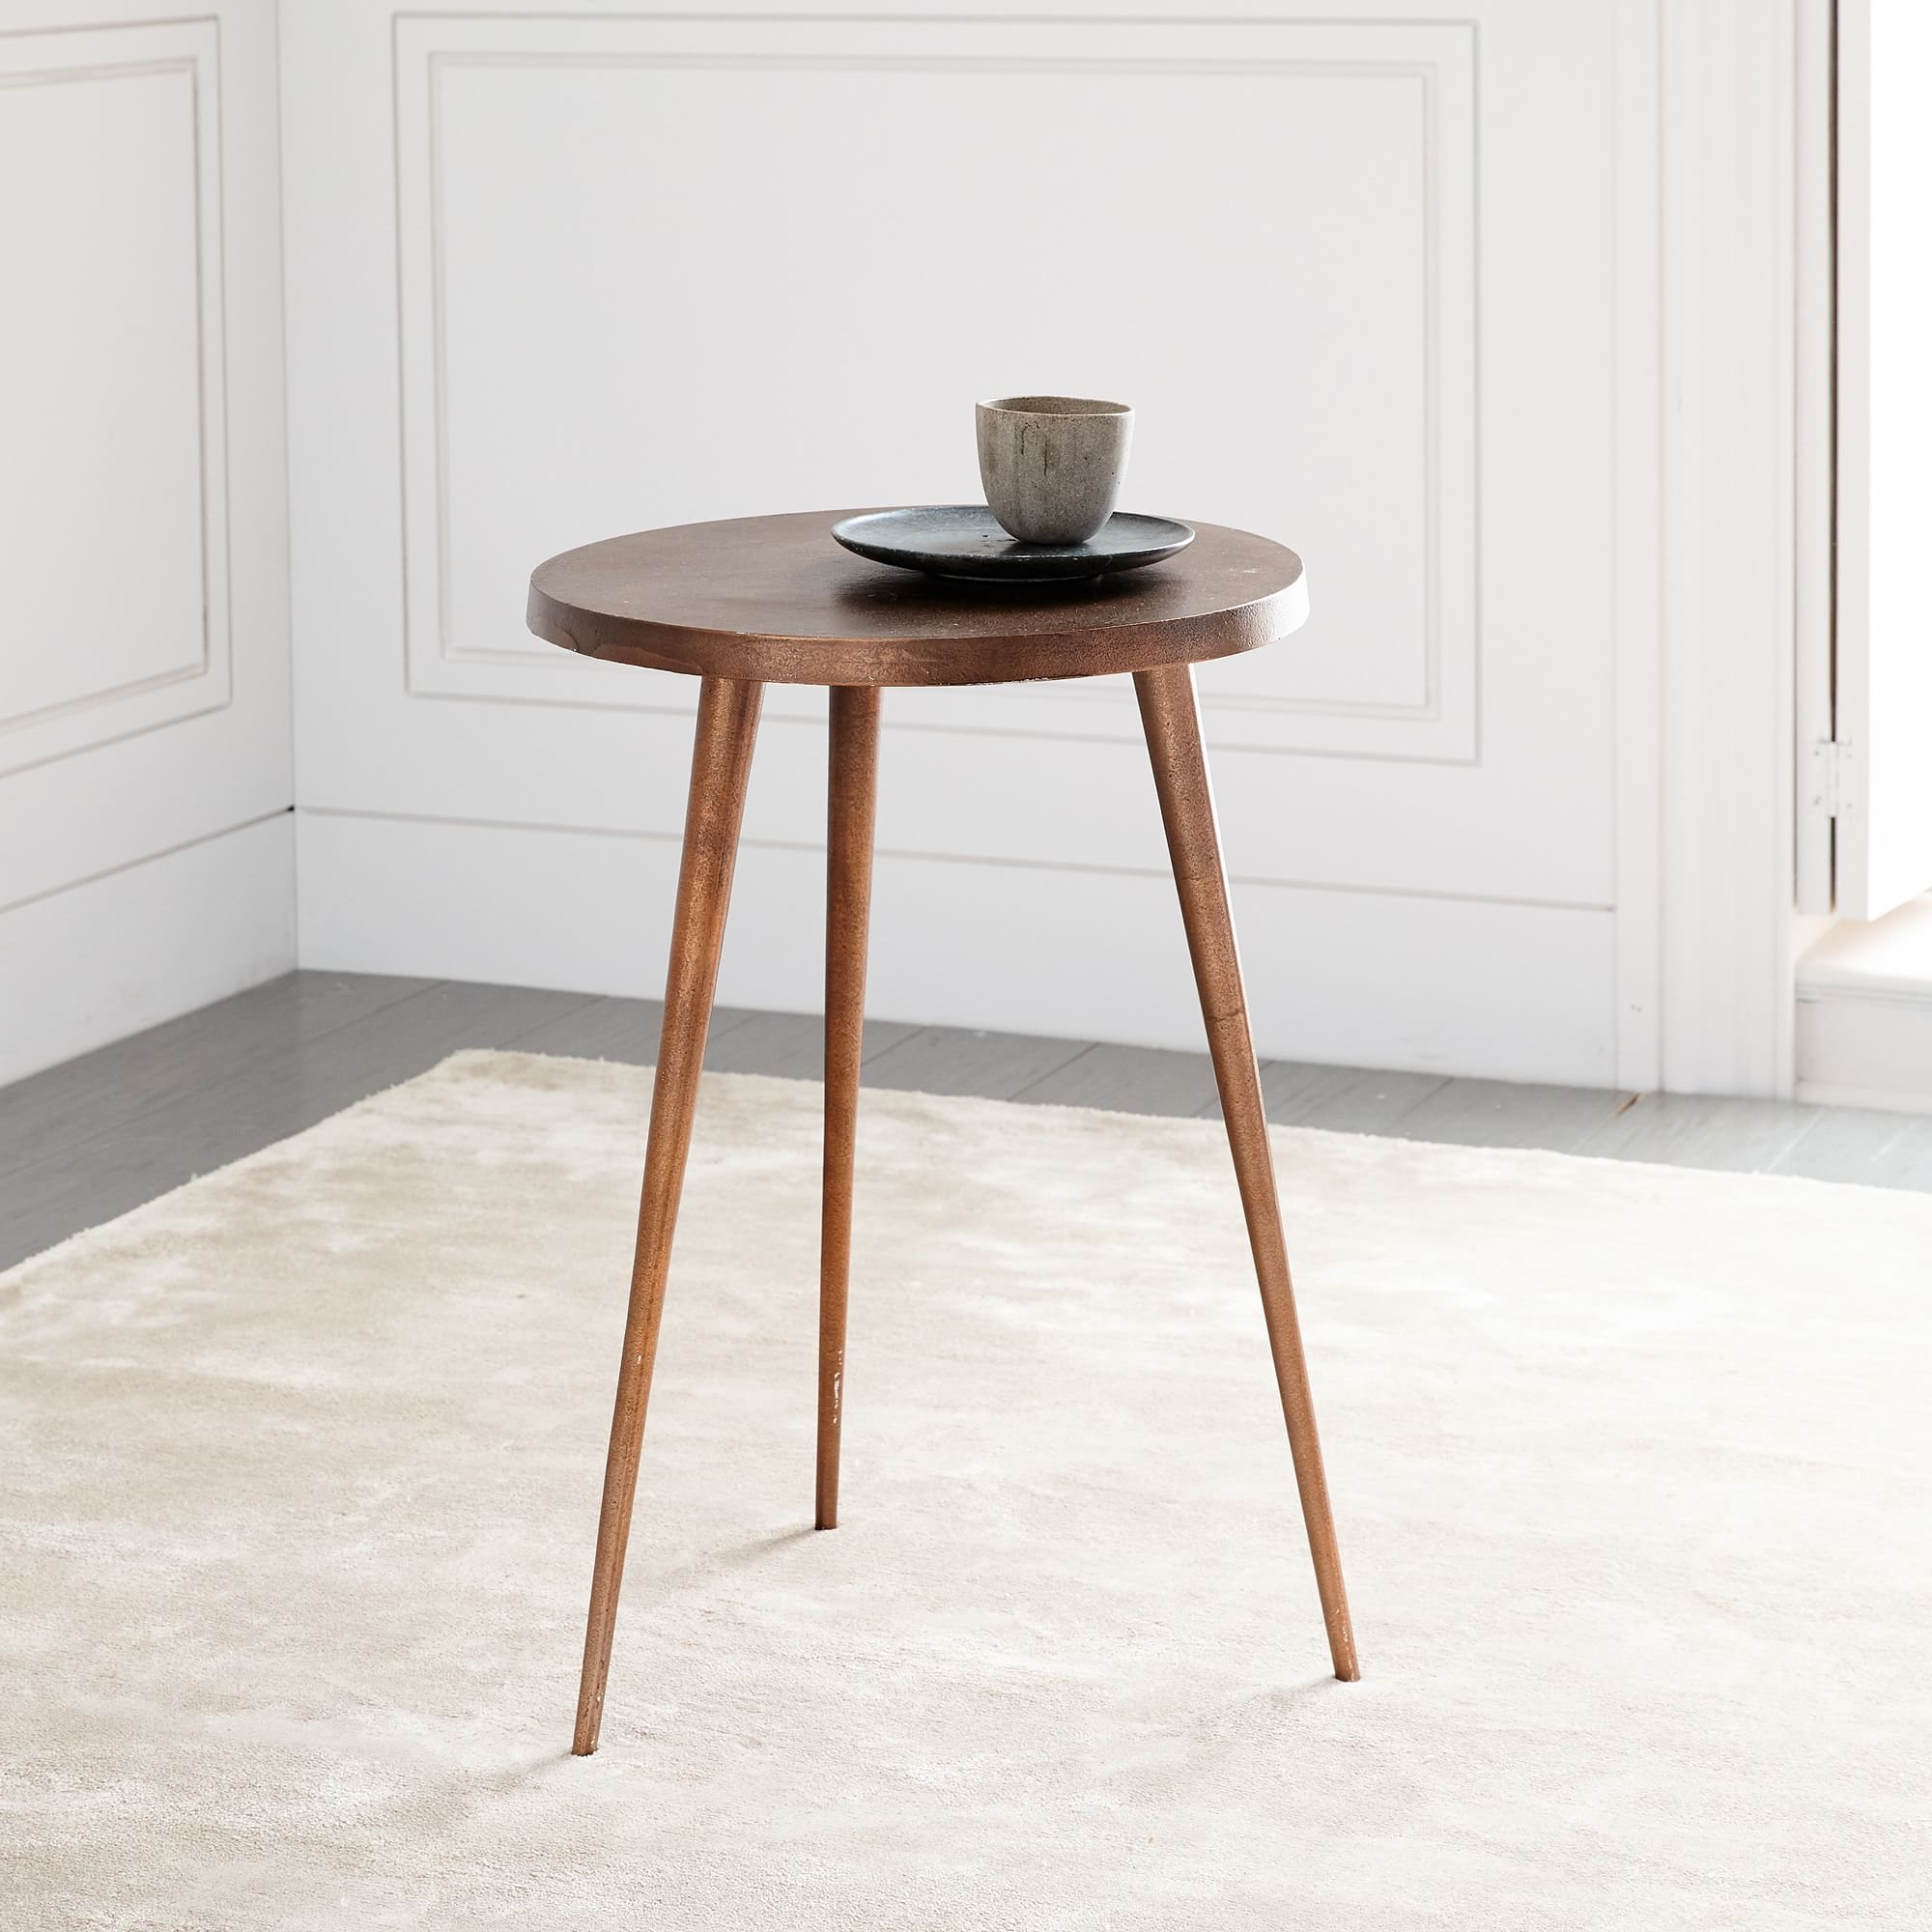 casted-tripod-round-side-table-15-xl.jpg